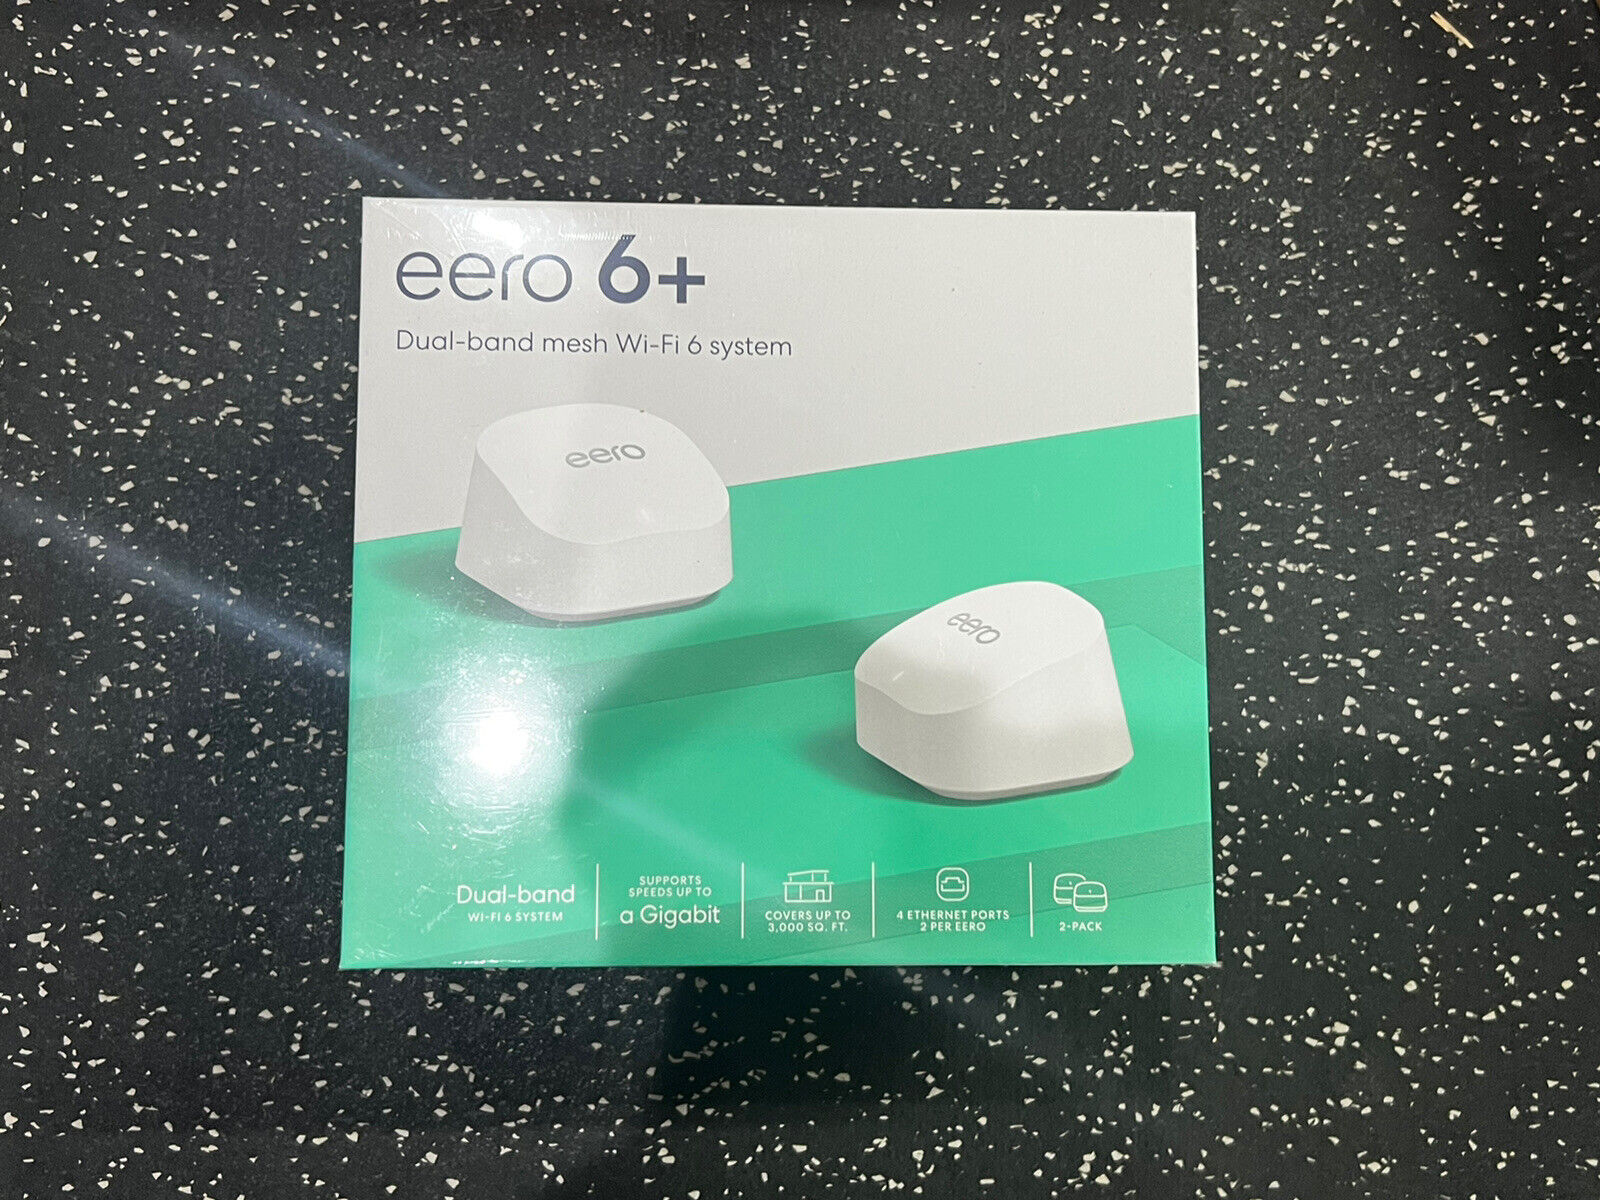 eero 6+ plus 2 pack 2402 Mbps 2 Port 574 Mbps Wireless Router - R010211 Amazon